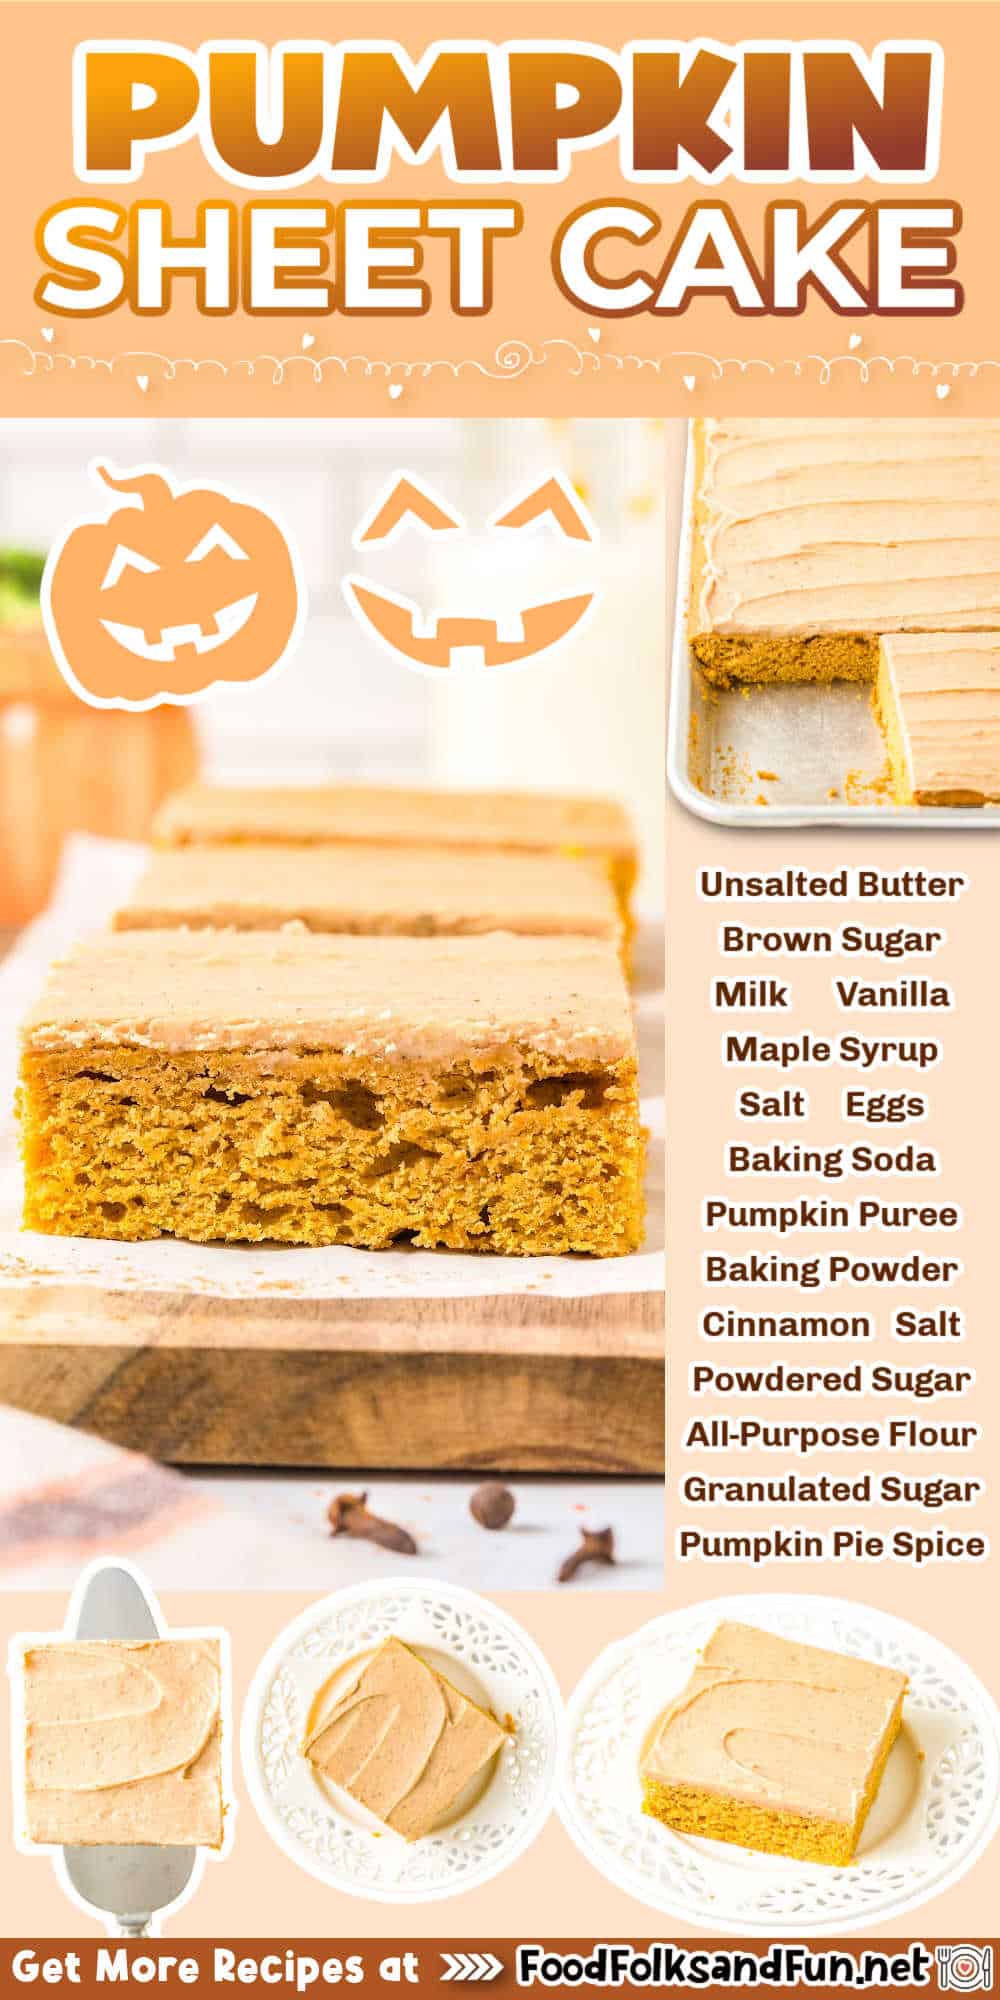 Pumpkin Sheet Cake with Browned Butter Cinnamon Icing is your new favorite fall dessert. It's perfect for feeding a crowd or bake sale. via @foodfolksandfun